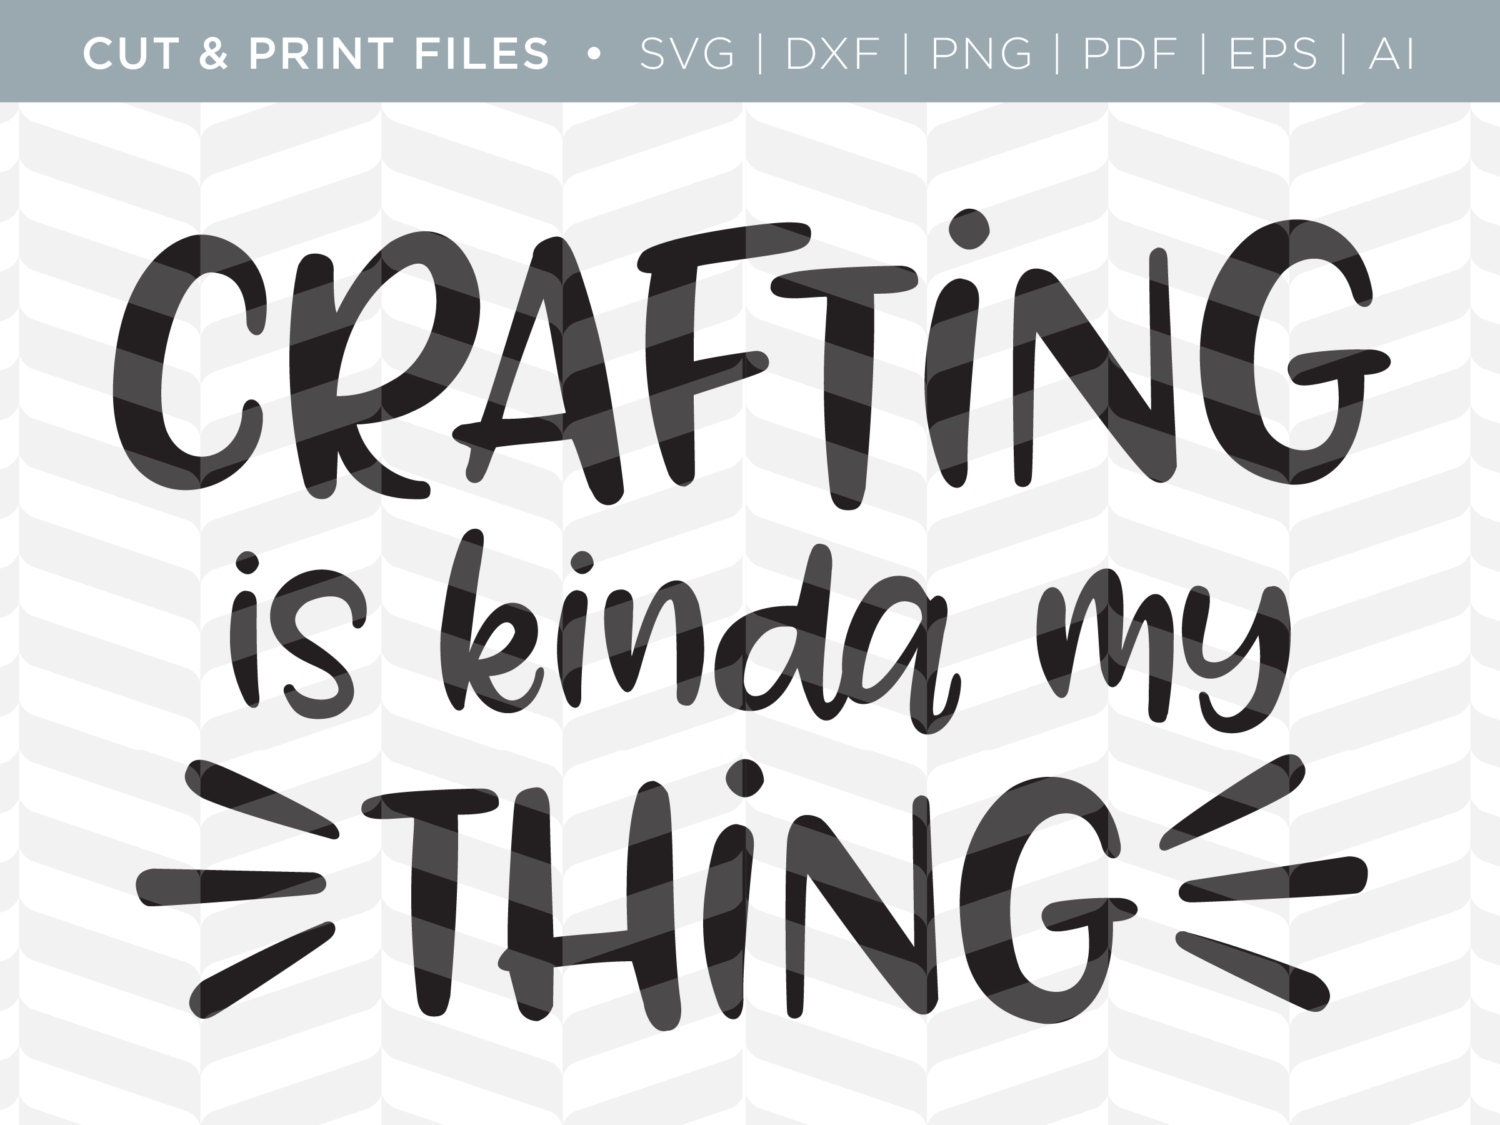 Download SVG Cut / Print Files Crafting Crafting Quote Cricut